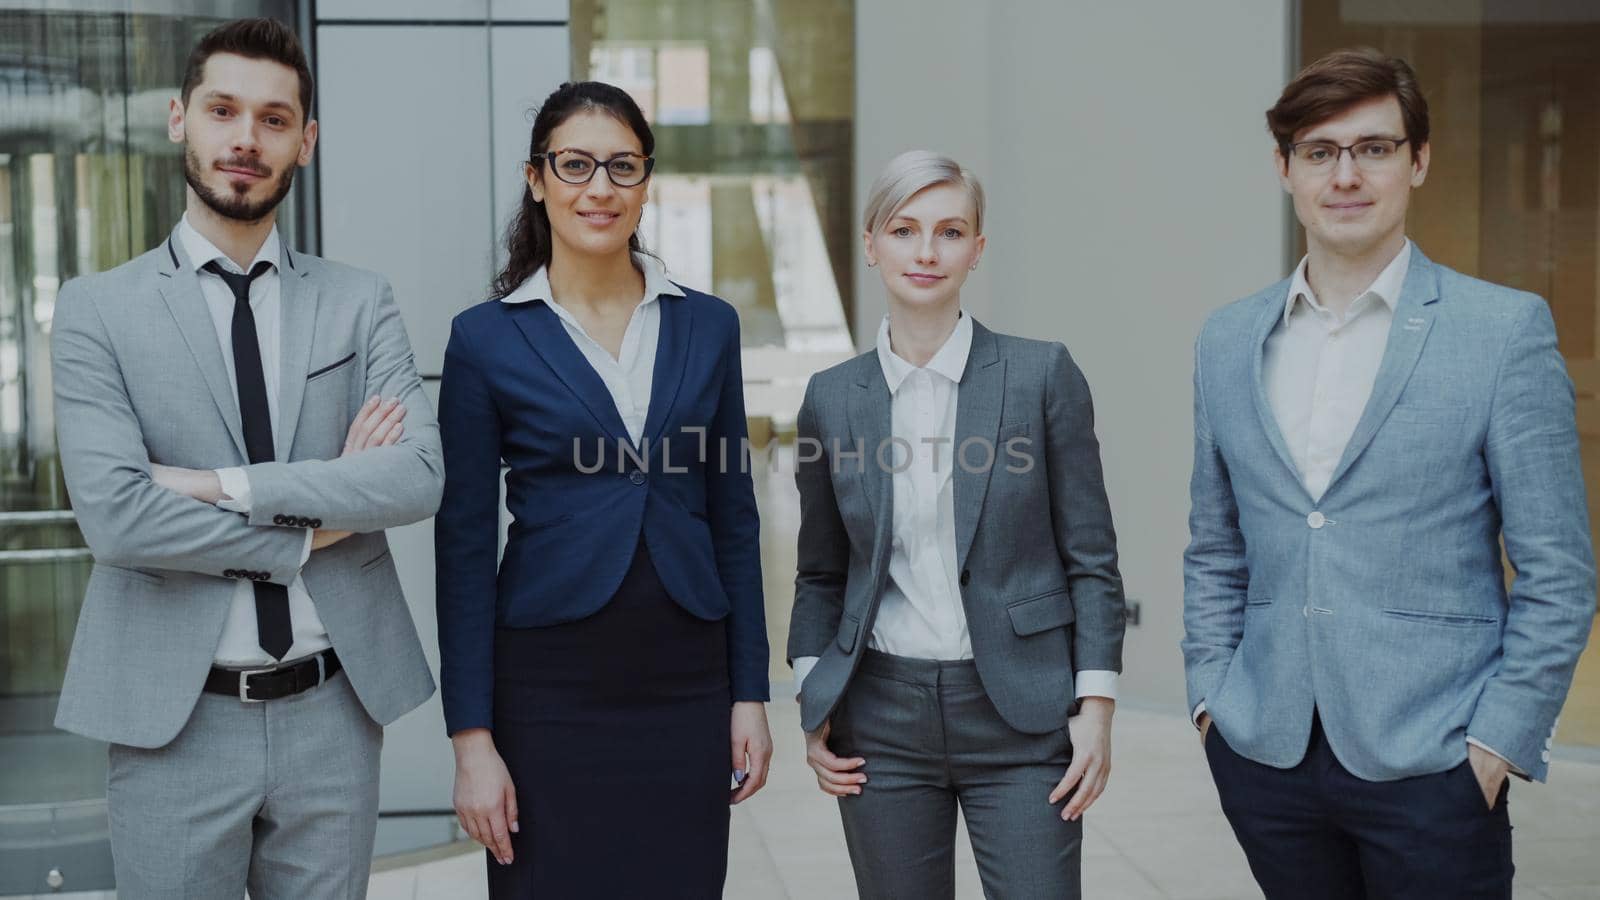 Portrait of group of business people smiling in modern office. Team of businessmen and businesswomen standing together by silverkblack